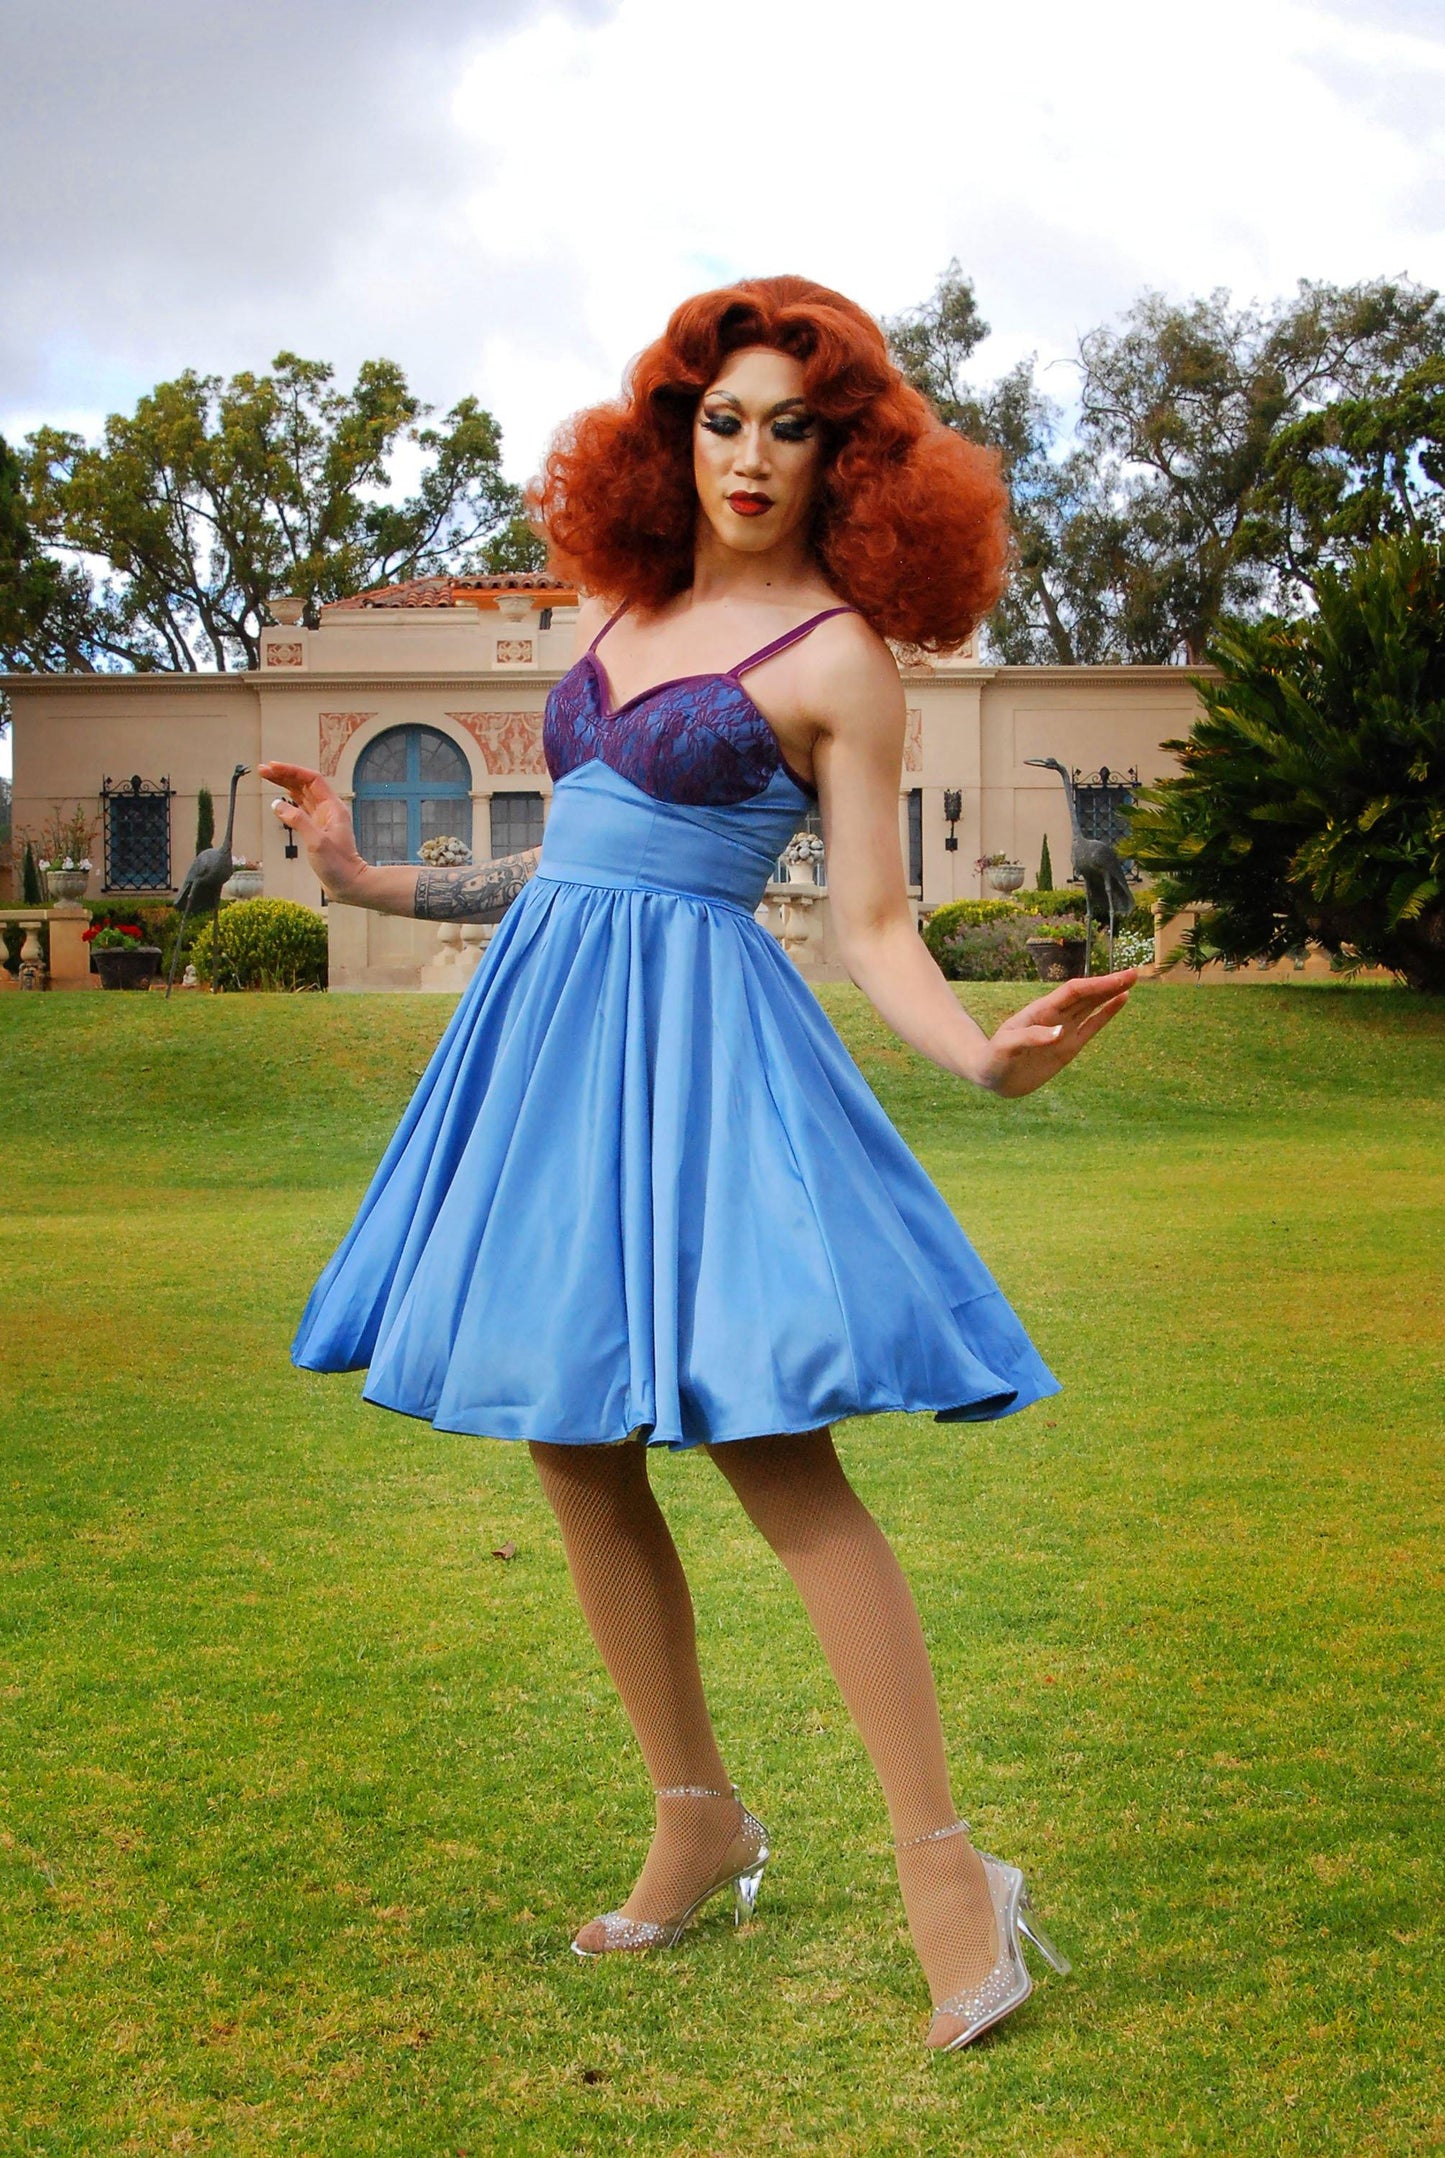 Courtney Vintage Swing Dress in Blue Satin | Pinup Couture - pinupgirlclothing.com